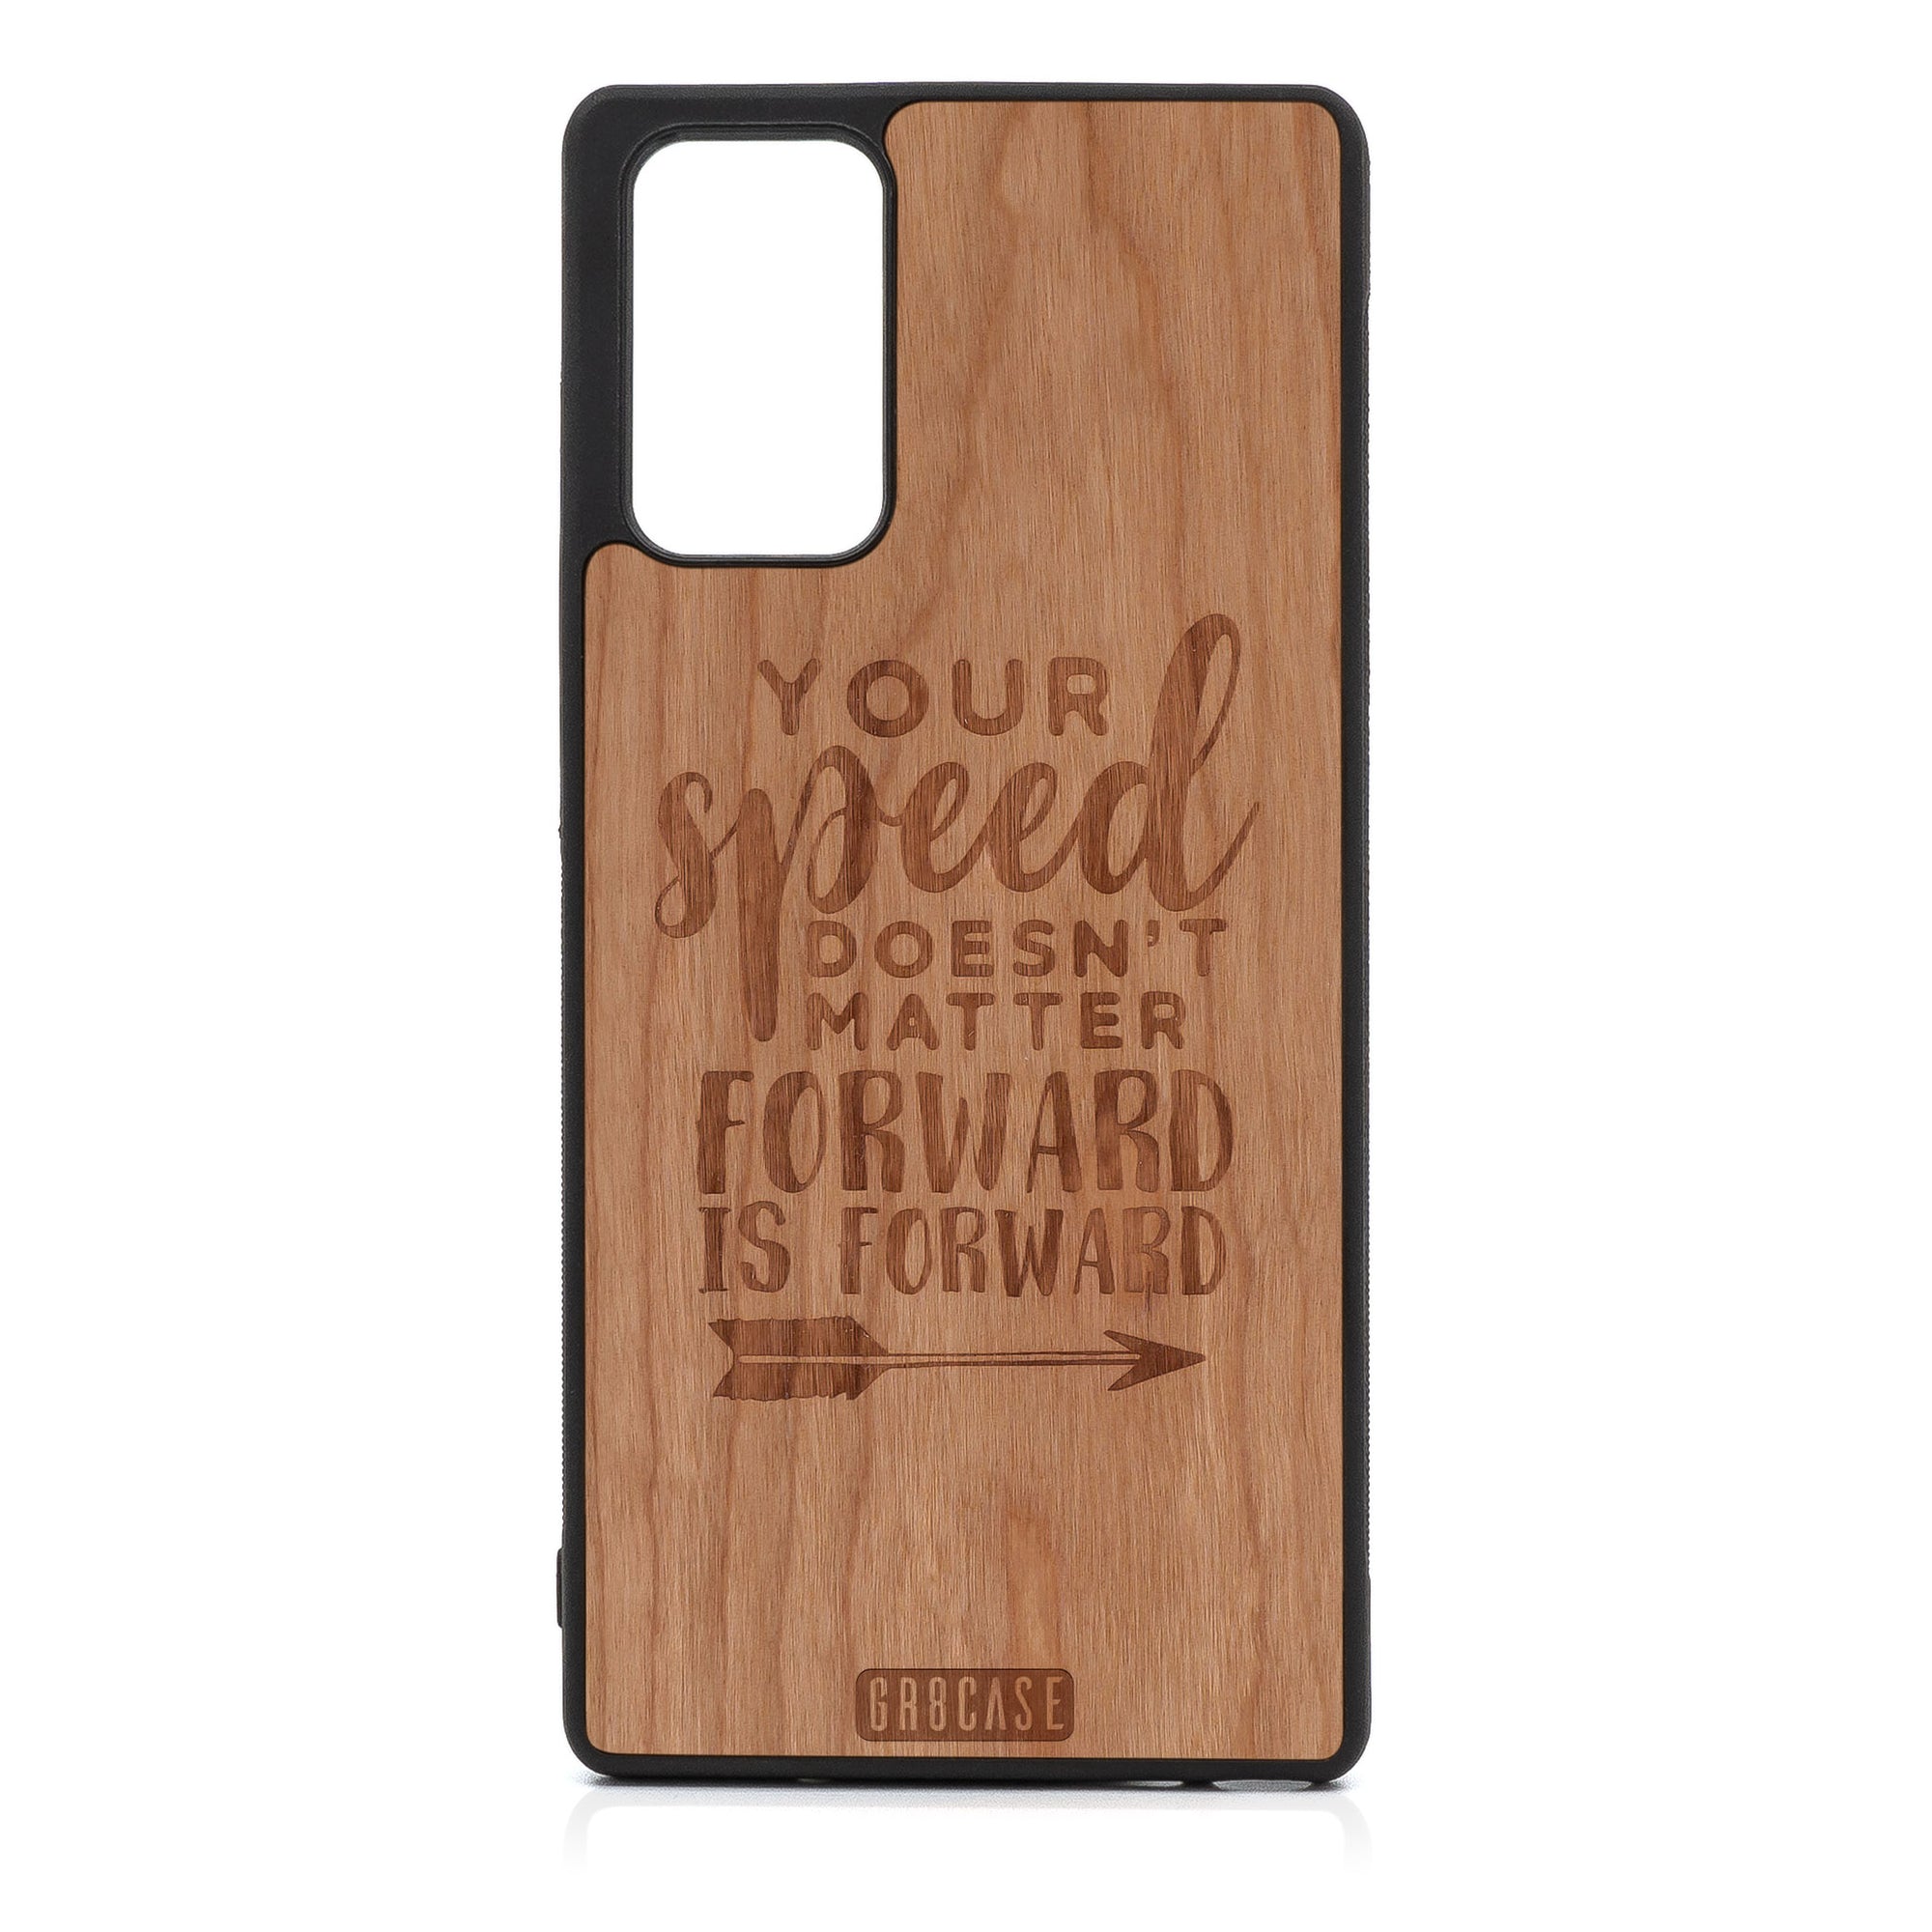 Your Speed Doesn't Matter Forward Is Forward Design Wood Case For Samsung Galaxy Note 20